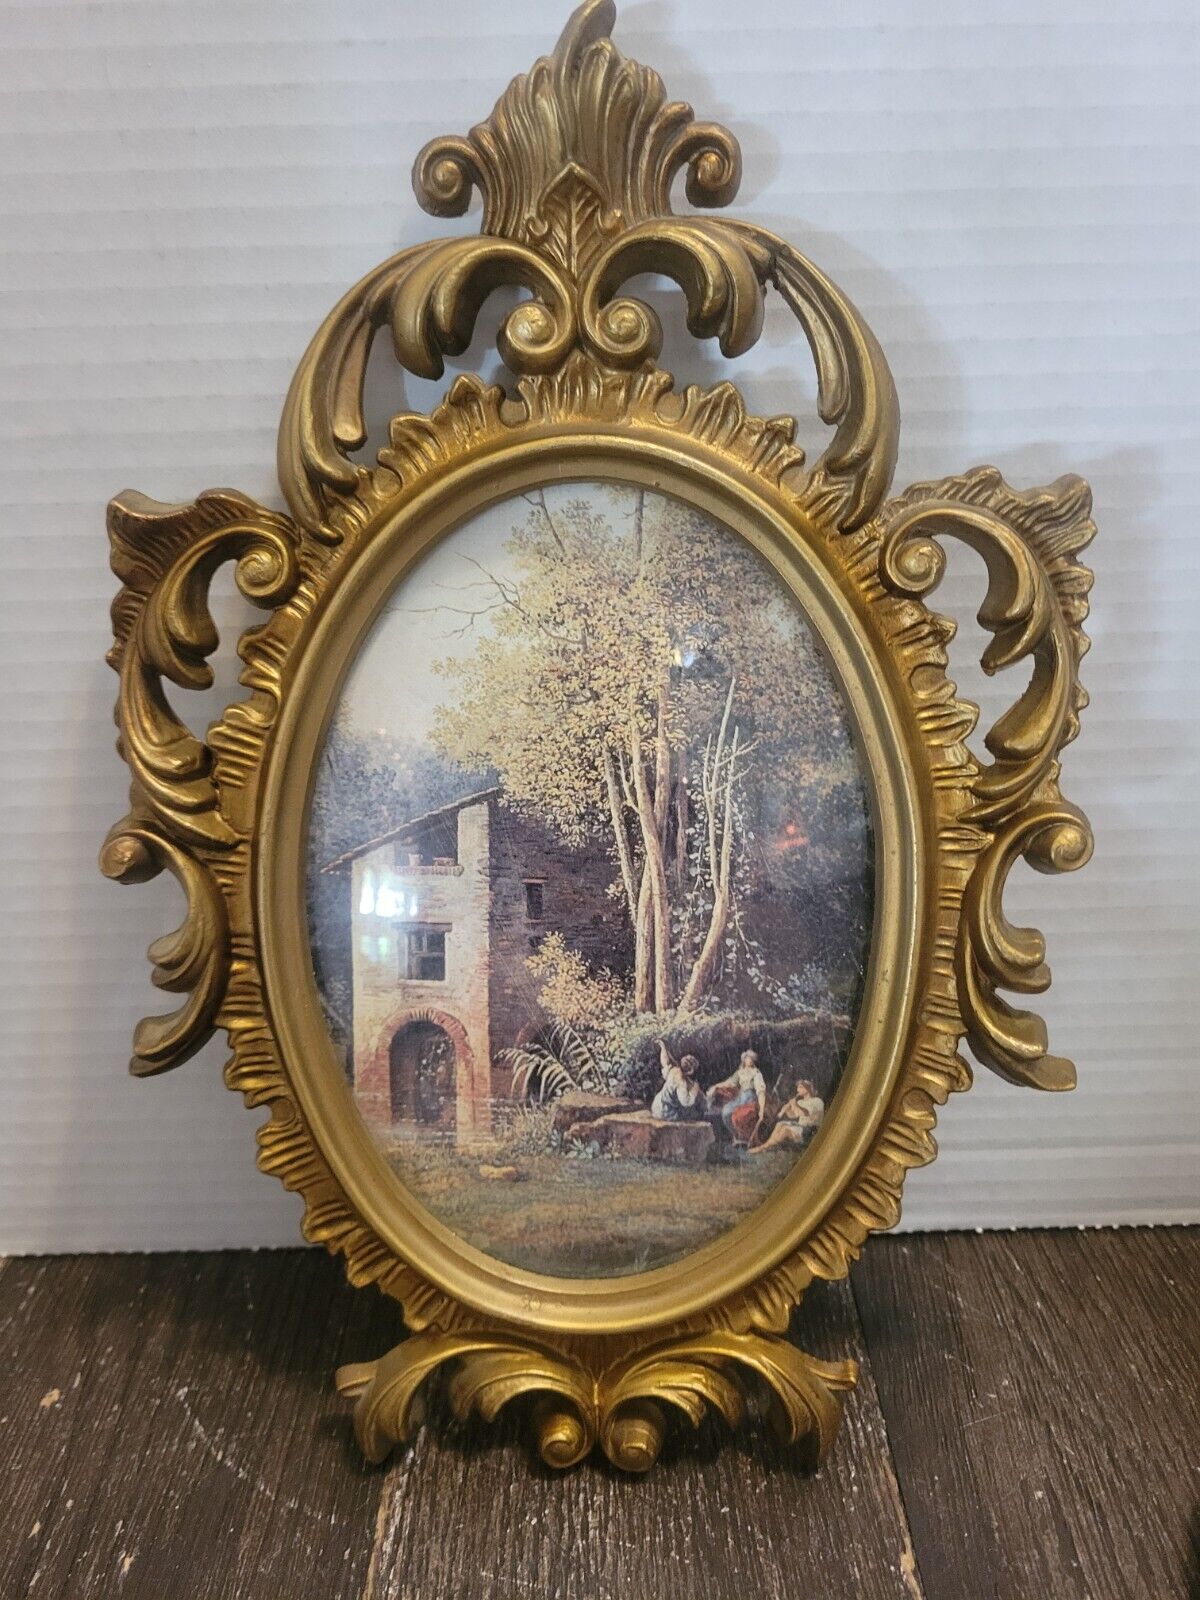 VTG Victorian Style Ornate Gold Resin Picture Frame Made In Italy 11 X 8”